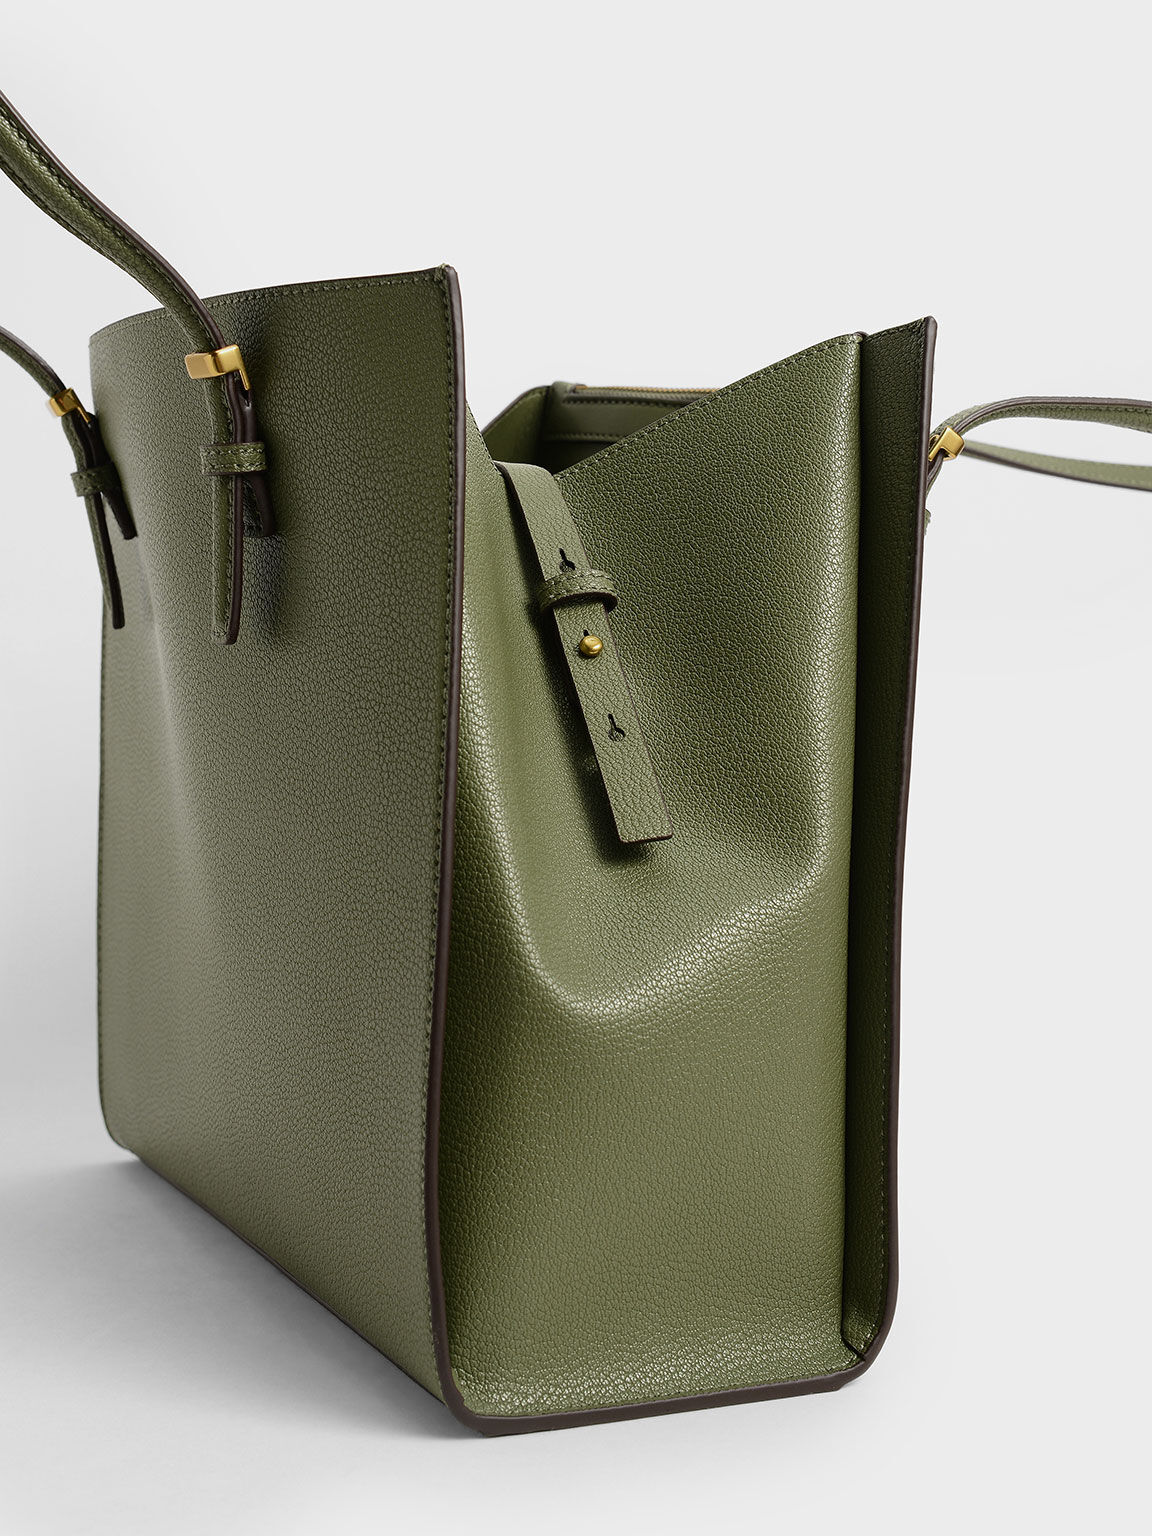 Tas Tote Large Double Handle, Olive, hi-res